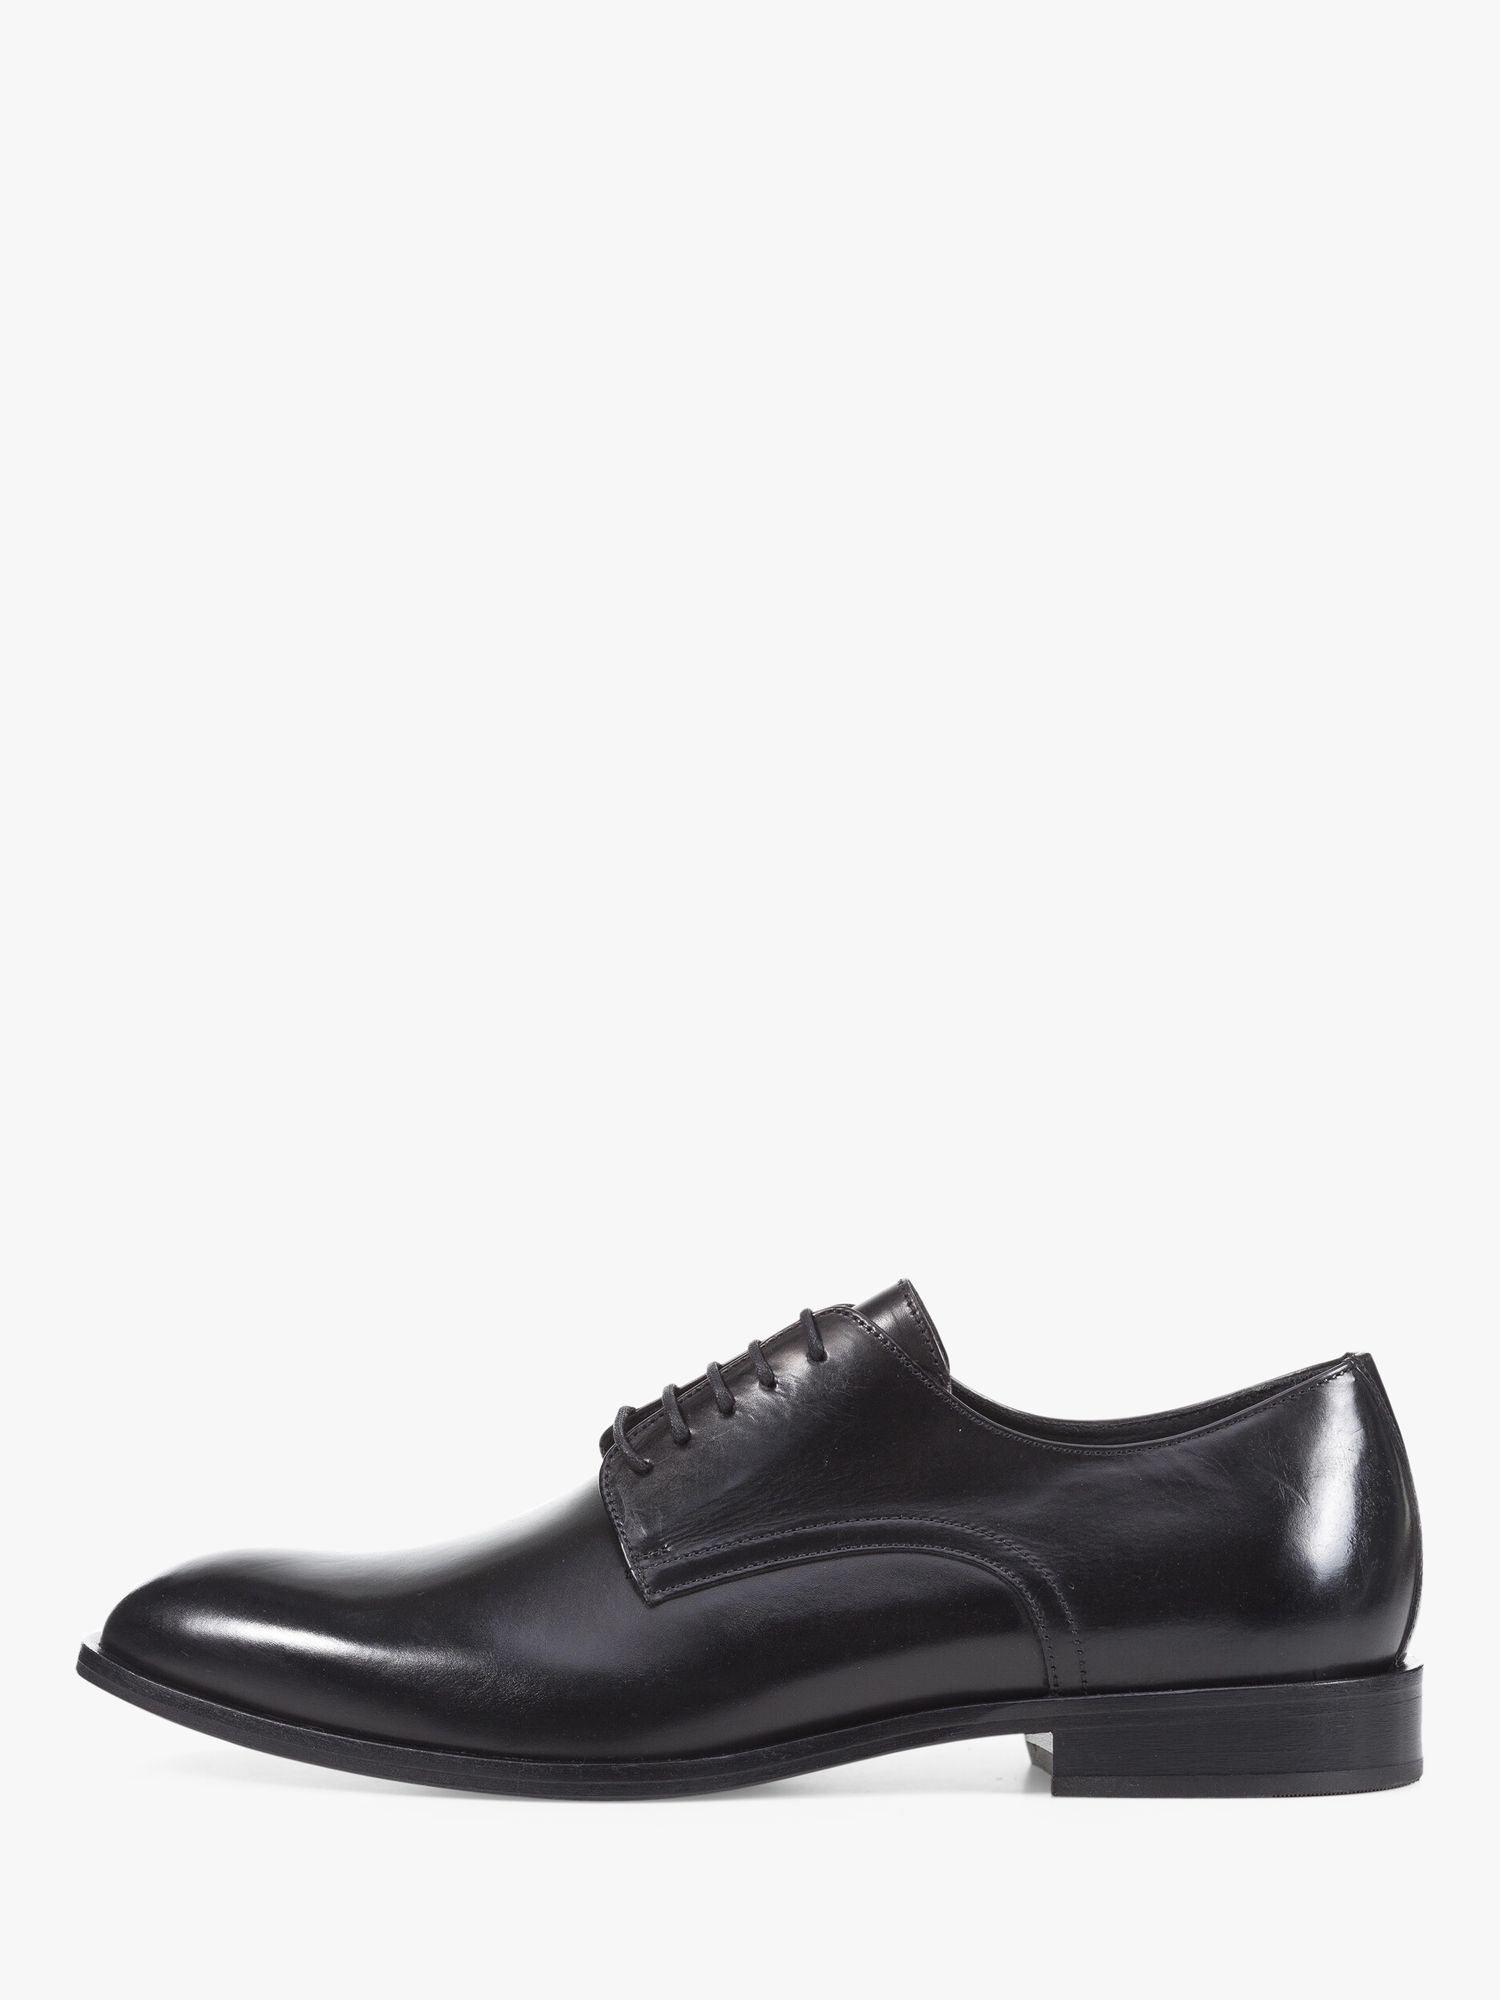 Geox Saymore Leather Derby Shoes